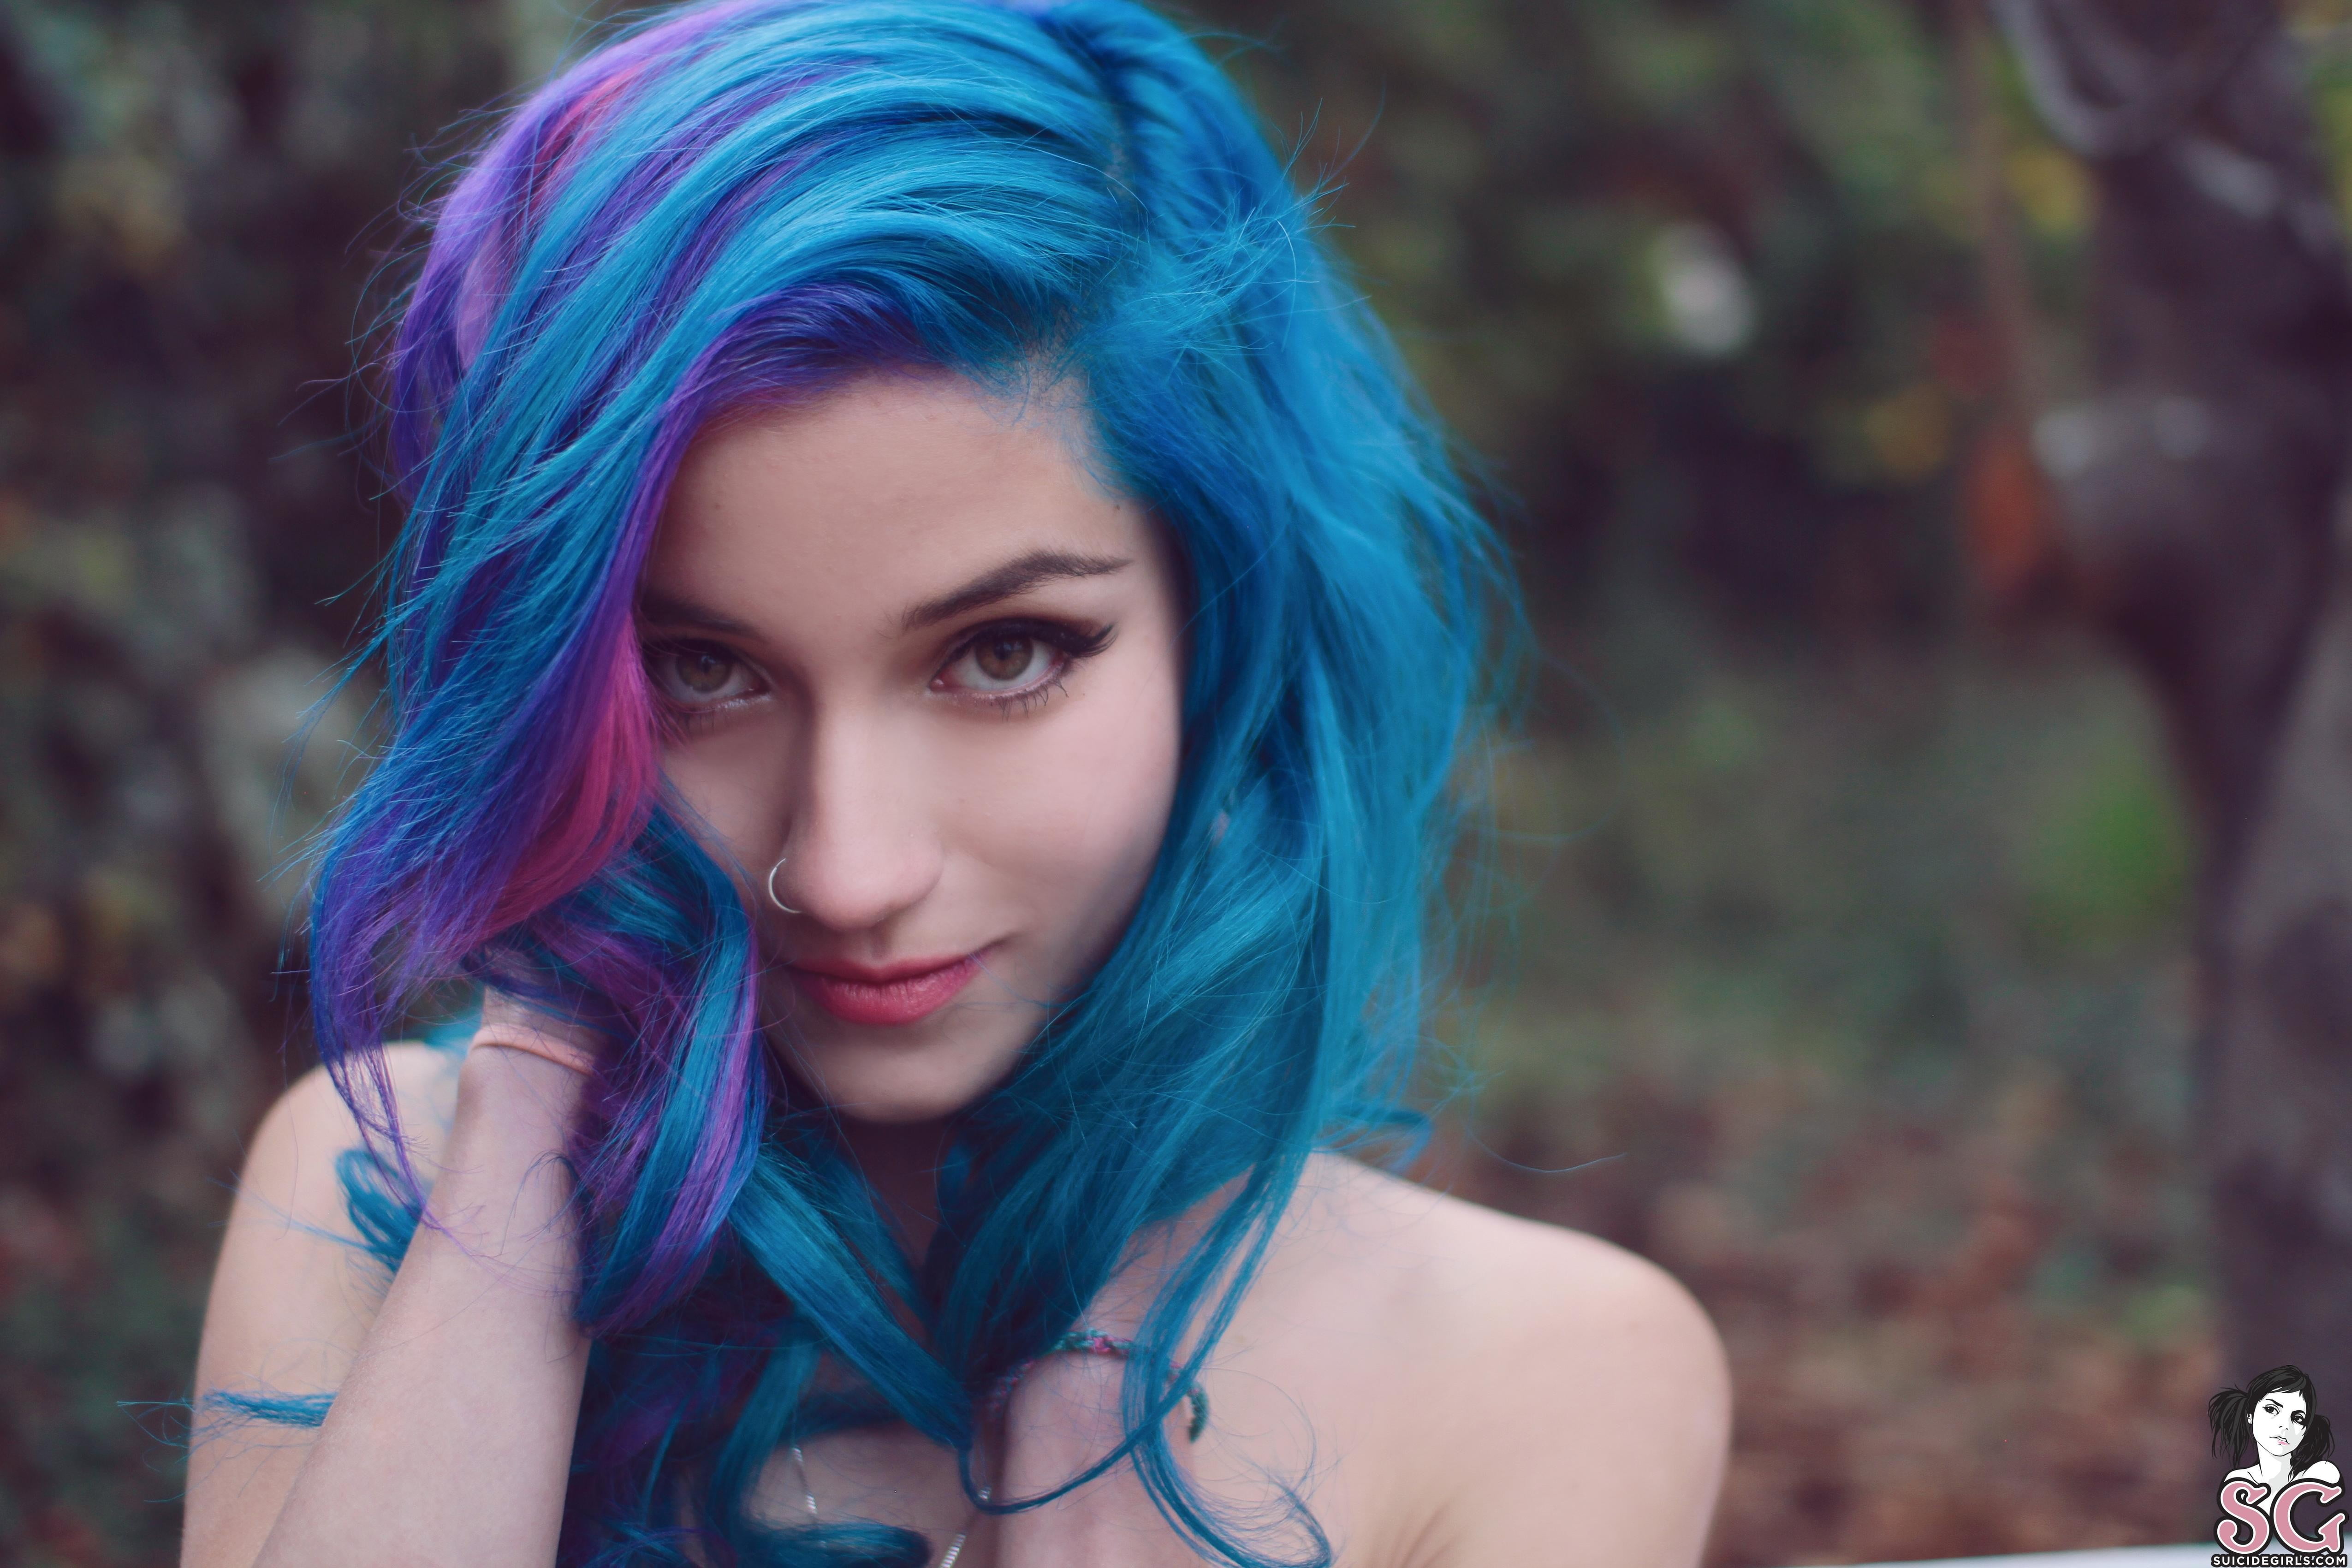 9. "Purple, Pink, and Blue Hair: Maintenance and Touch-Up Tips" - wide 3